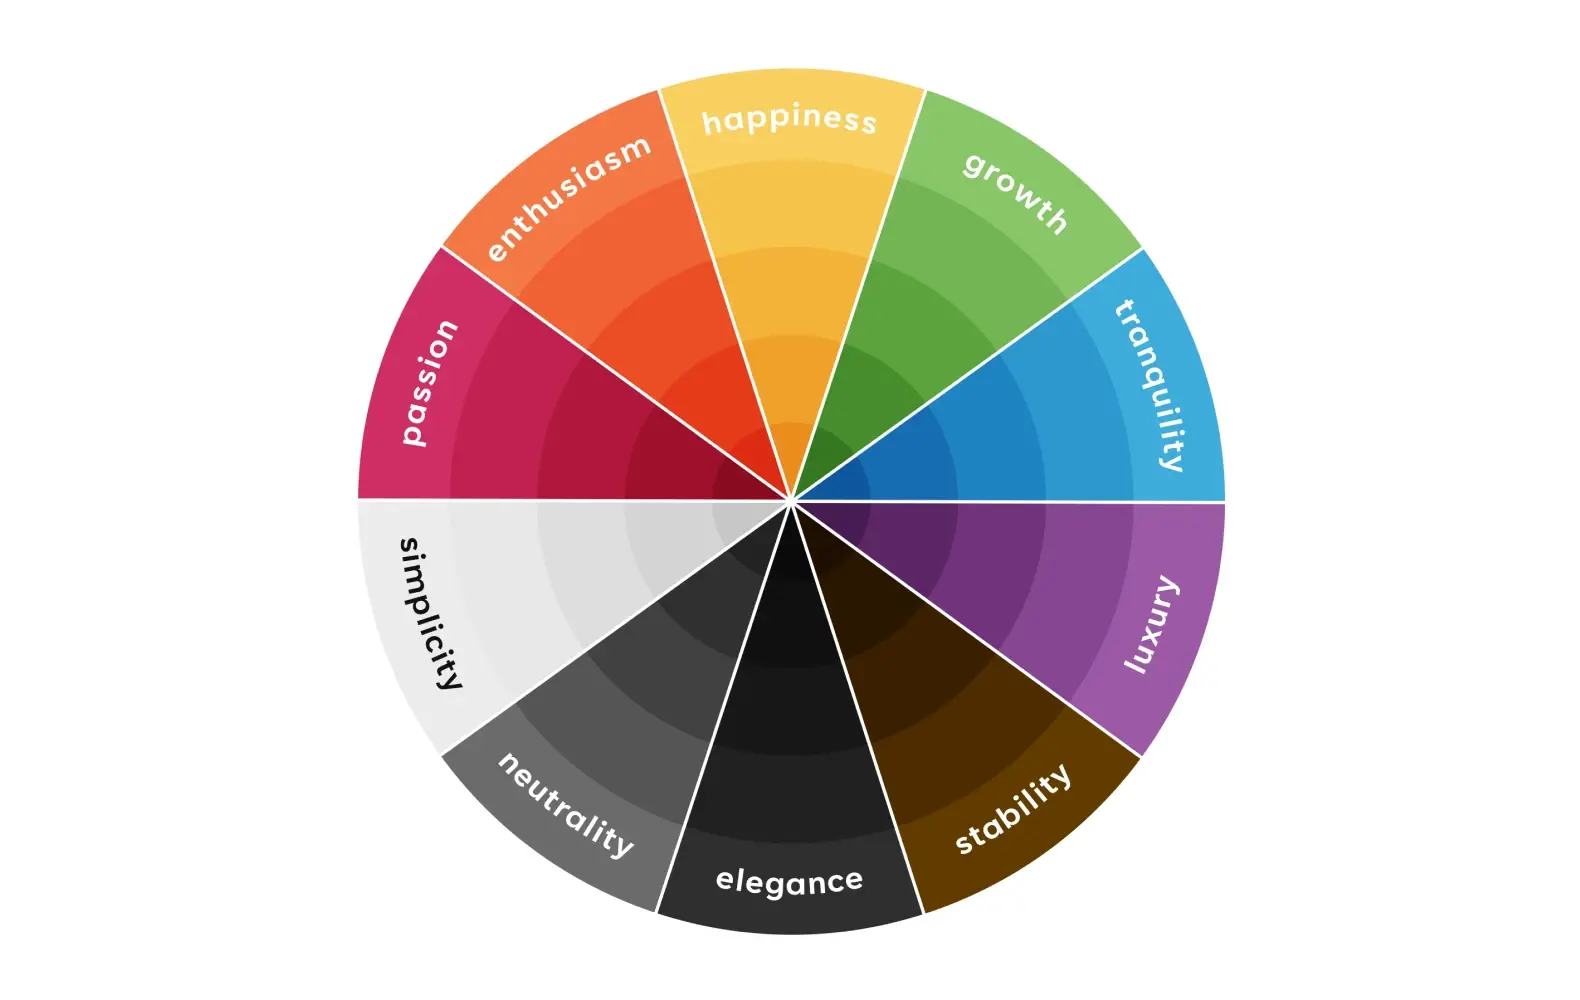 A color wheel showing different colors along with text describing the emotion each color conveys.